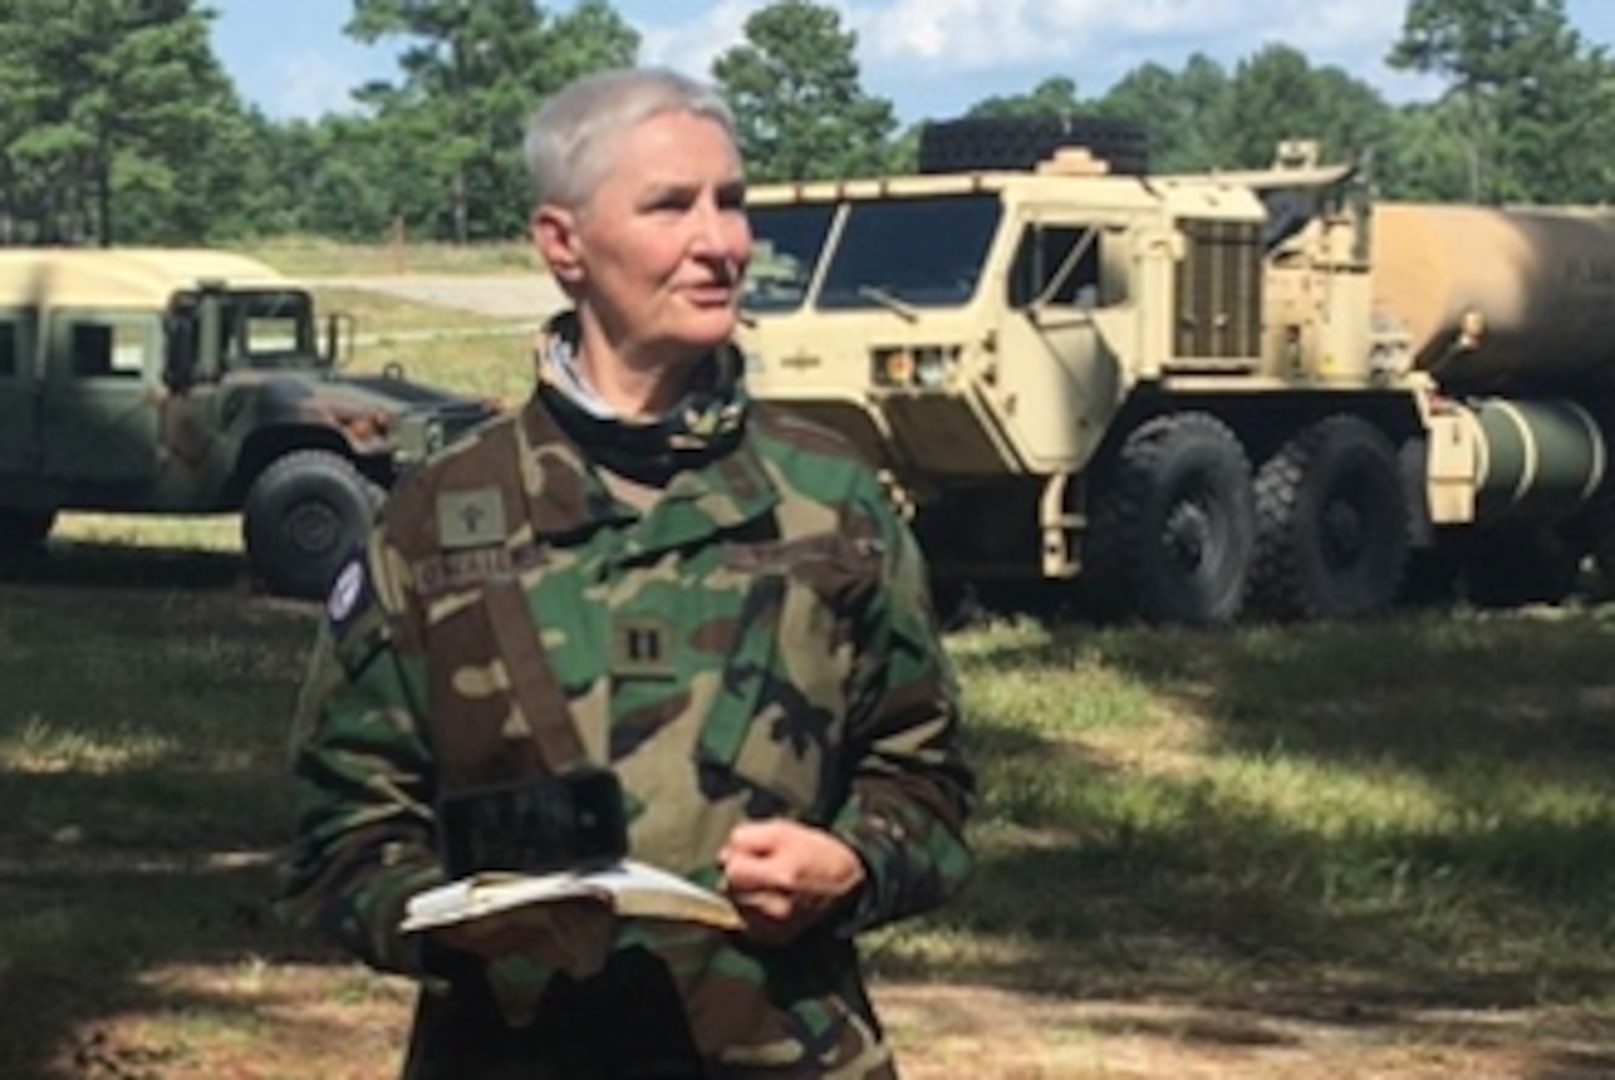 Capt. (Va.) Deb O'Neil-Lewis, a chaplain with the Virginia Defense Force, leads a field service during the Summer 2020 annual training season at Fort Pickett, Virginia.